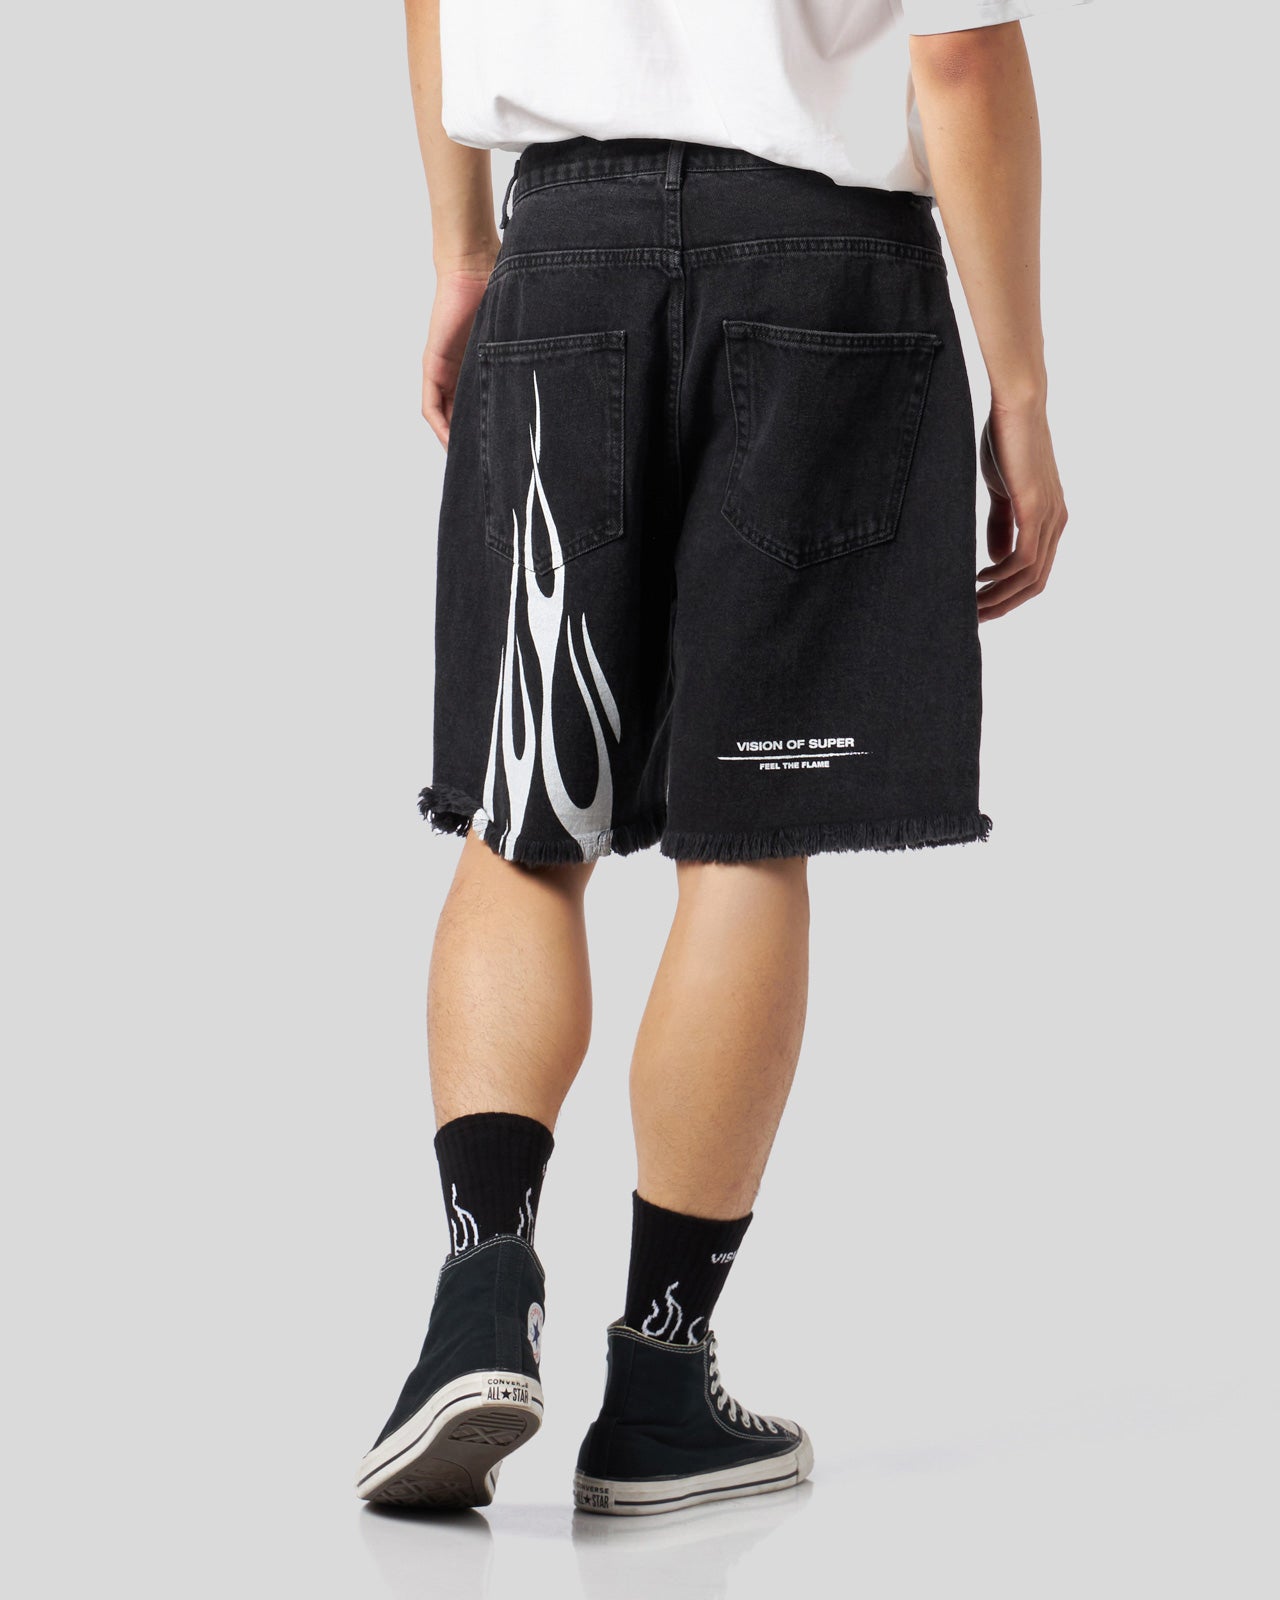 BLACK DENIM SHORTS WITH PRINTED FLAMES AND LOGO